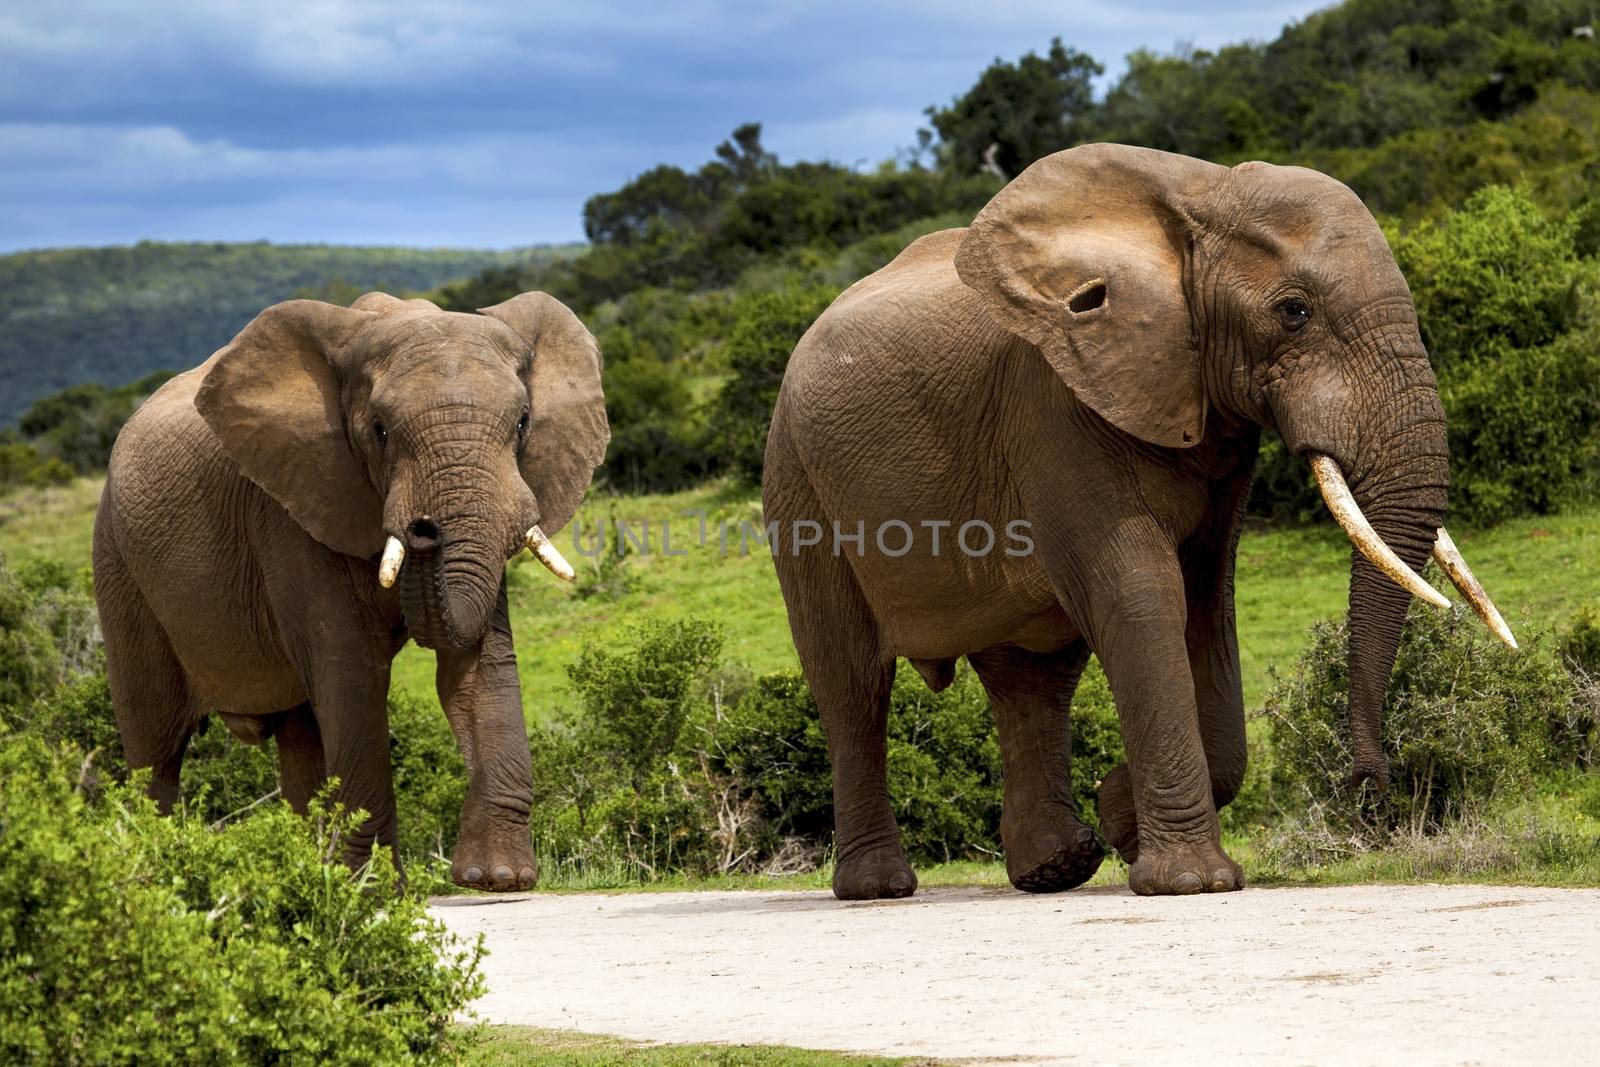 Two Elephants walking in the road in a safari park in South Africa.